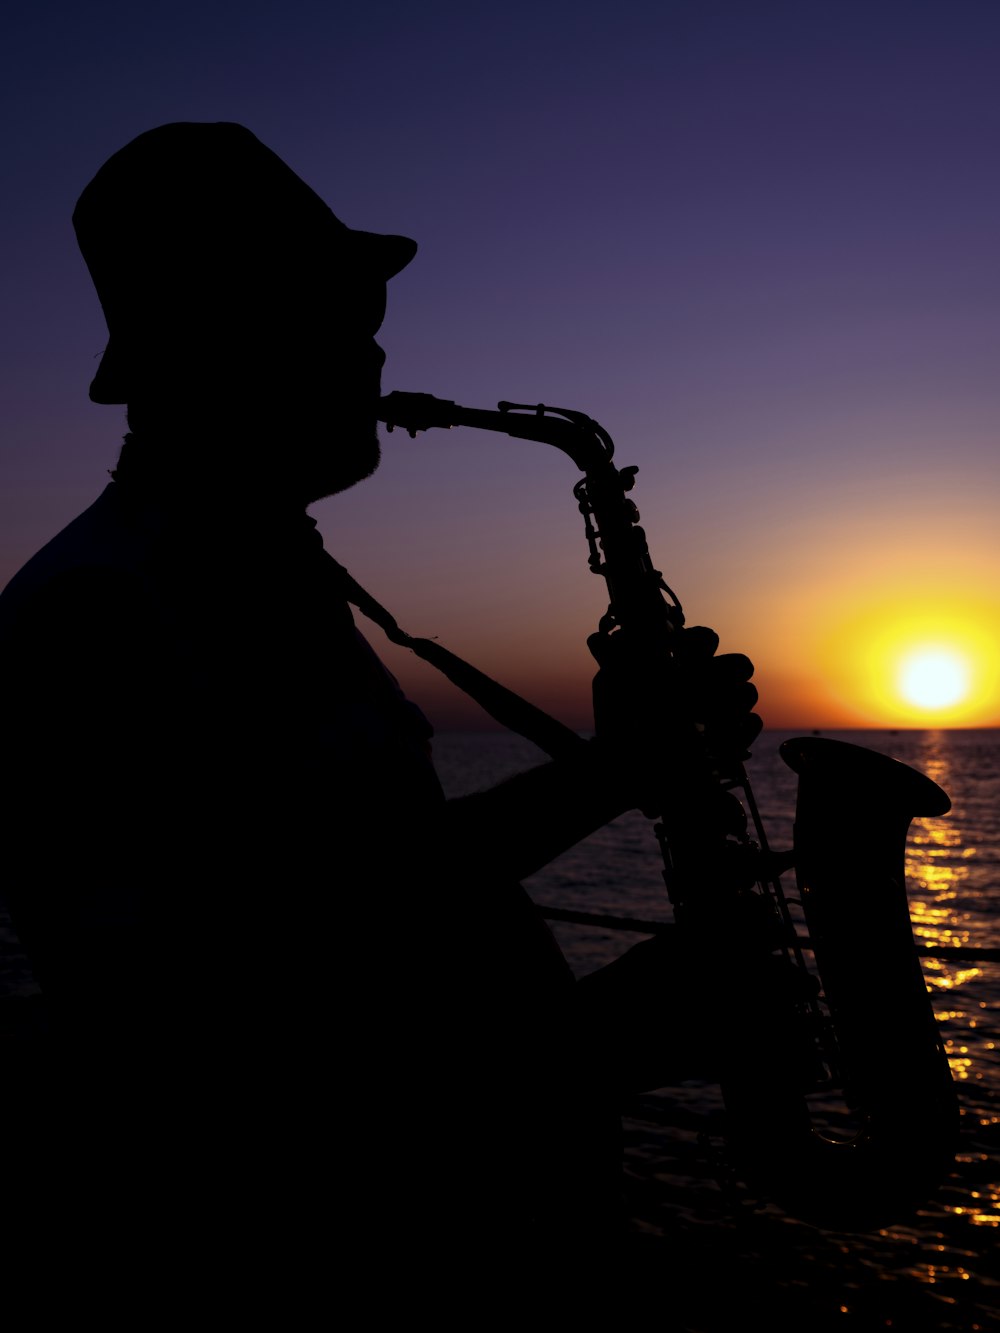 a silhouette of a man playing a saxophone at sunset